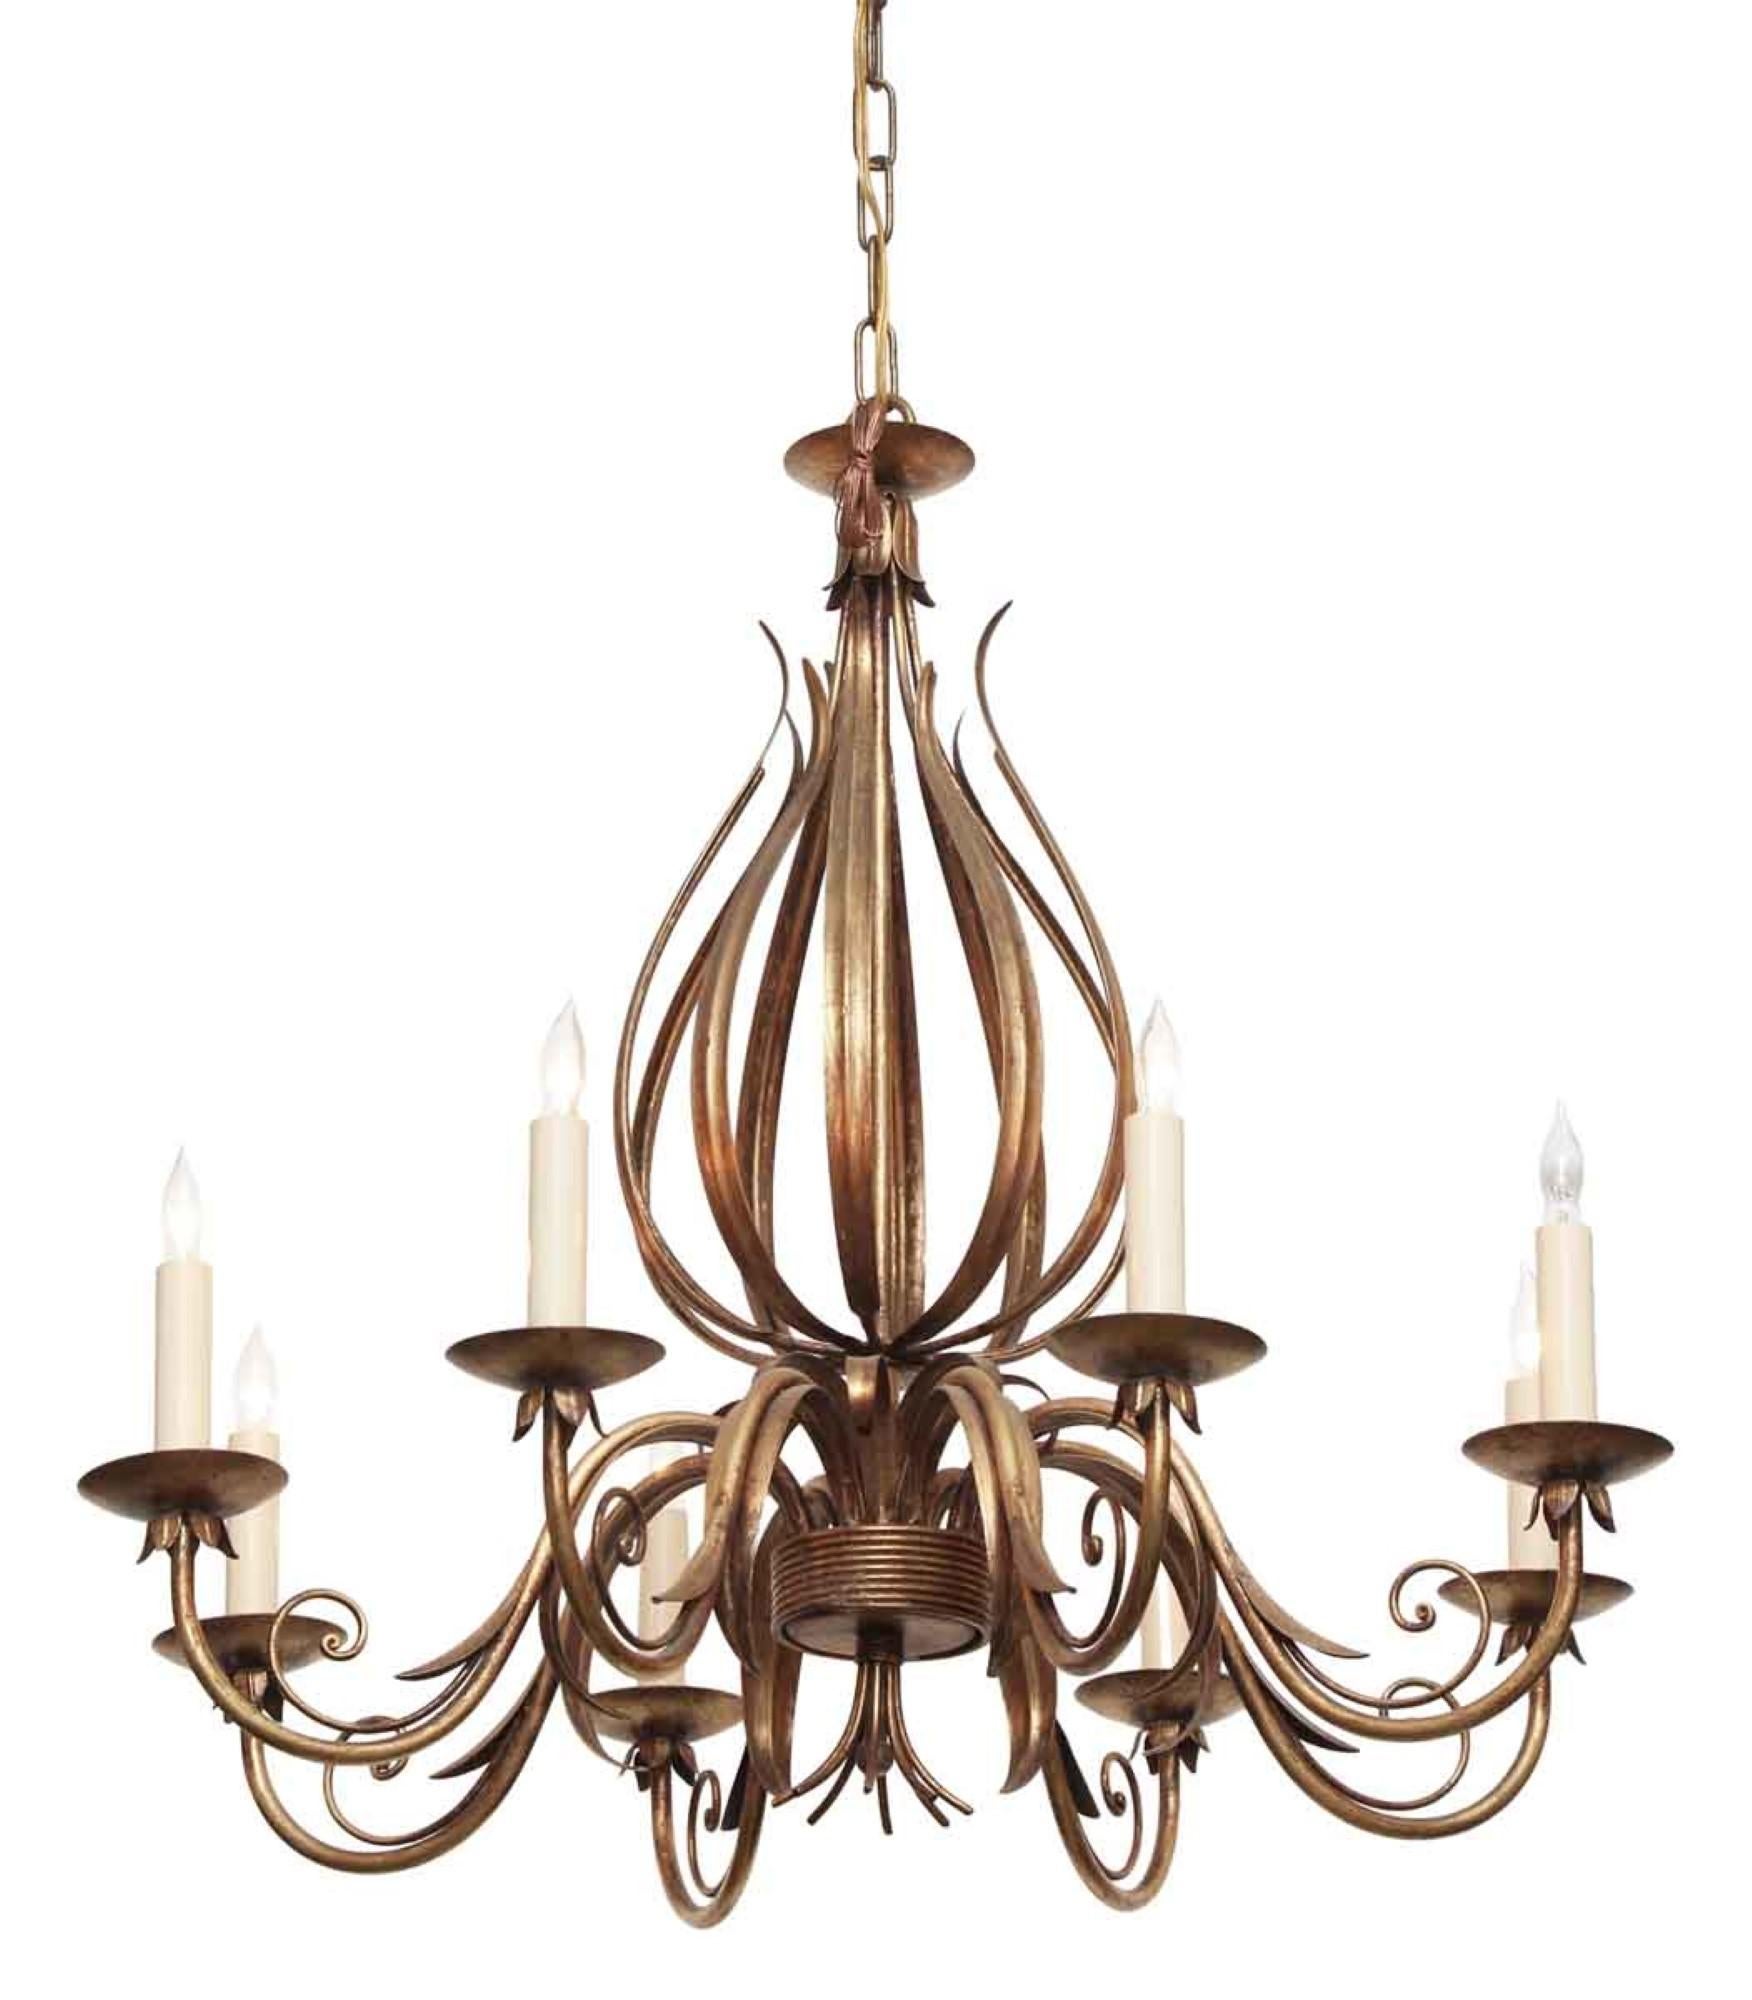 2000s Florentine style chandelier with articulated leaves making up the body and formed wrought iron leaves finished with gold leaf. Small quantity available at time of posting. Priced each. This can be viewed at our Scranton, Pennsylvania location.